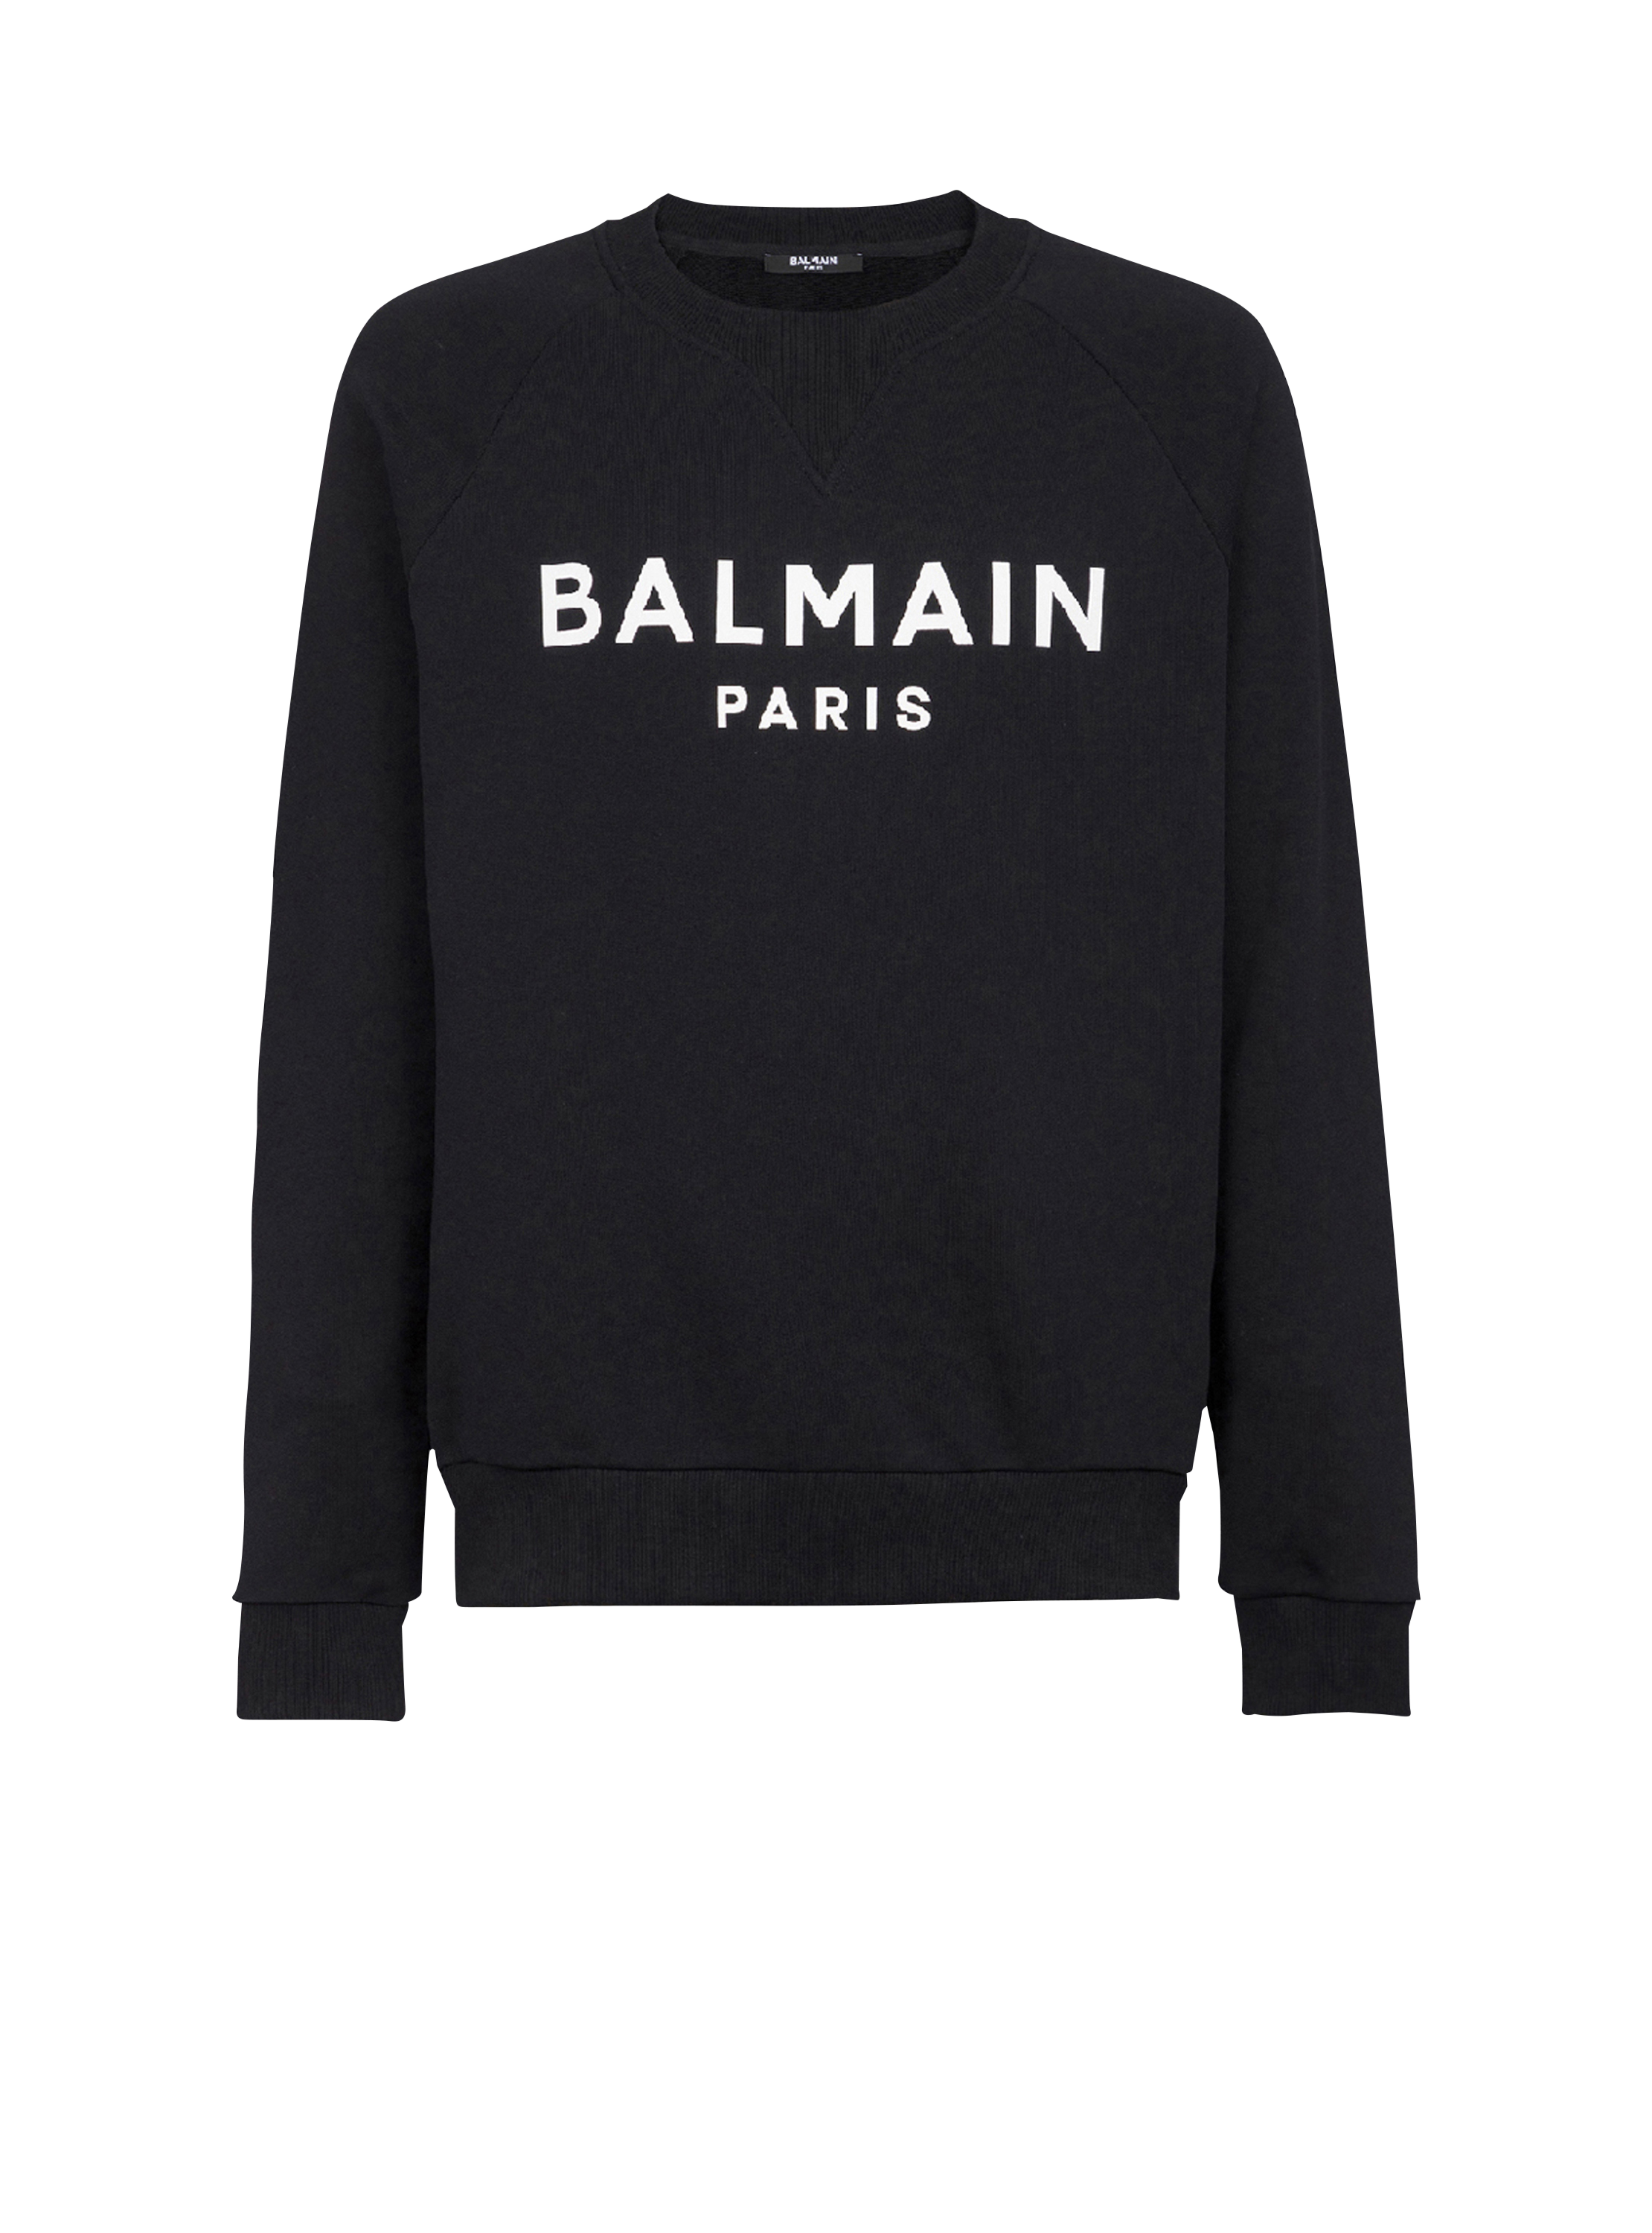 gym and workout clothes Sweatshirts Save 47% Mens Clothing Activewear Balmain Cotton Flock Sweatshirt in Black for Men 